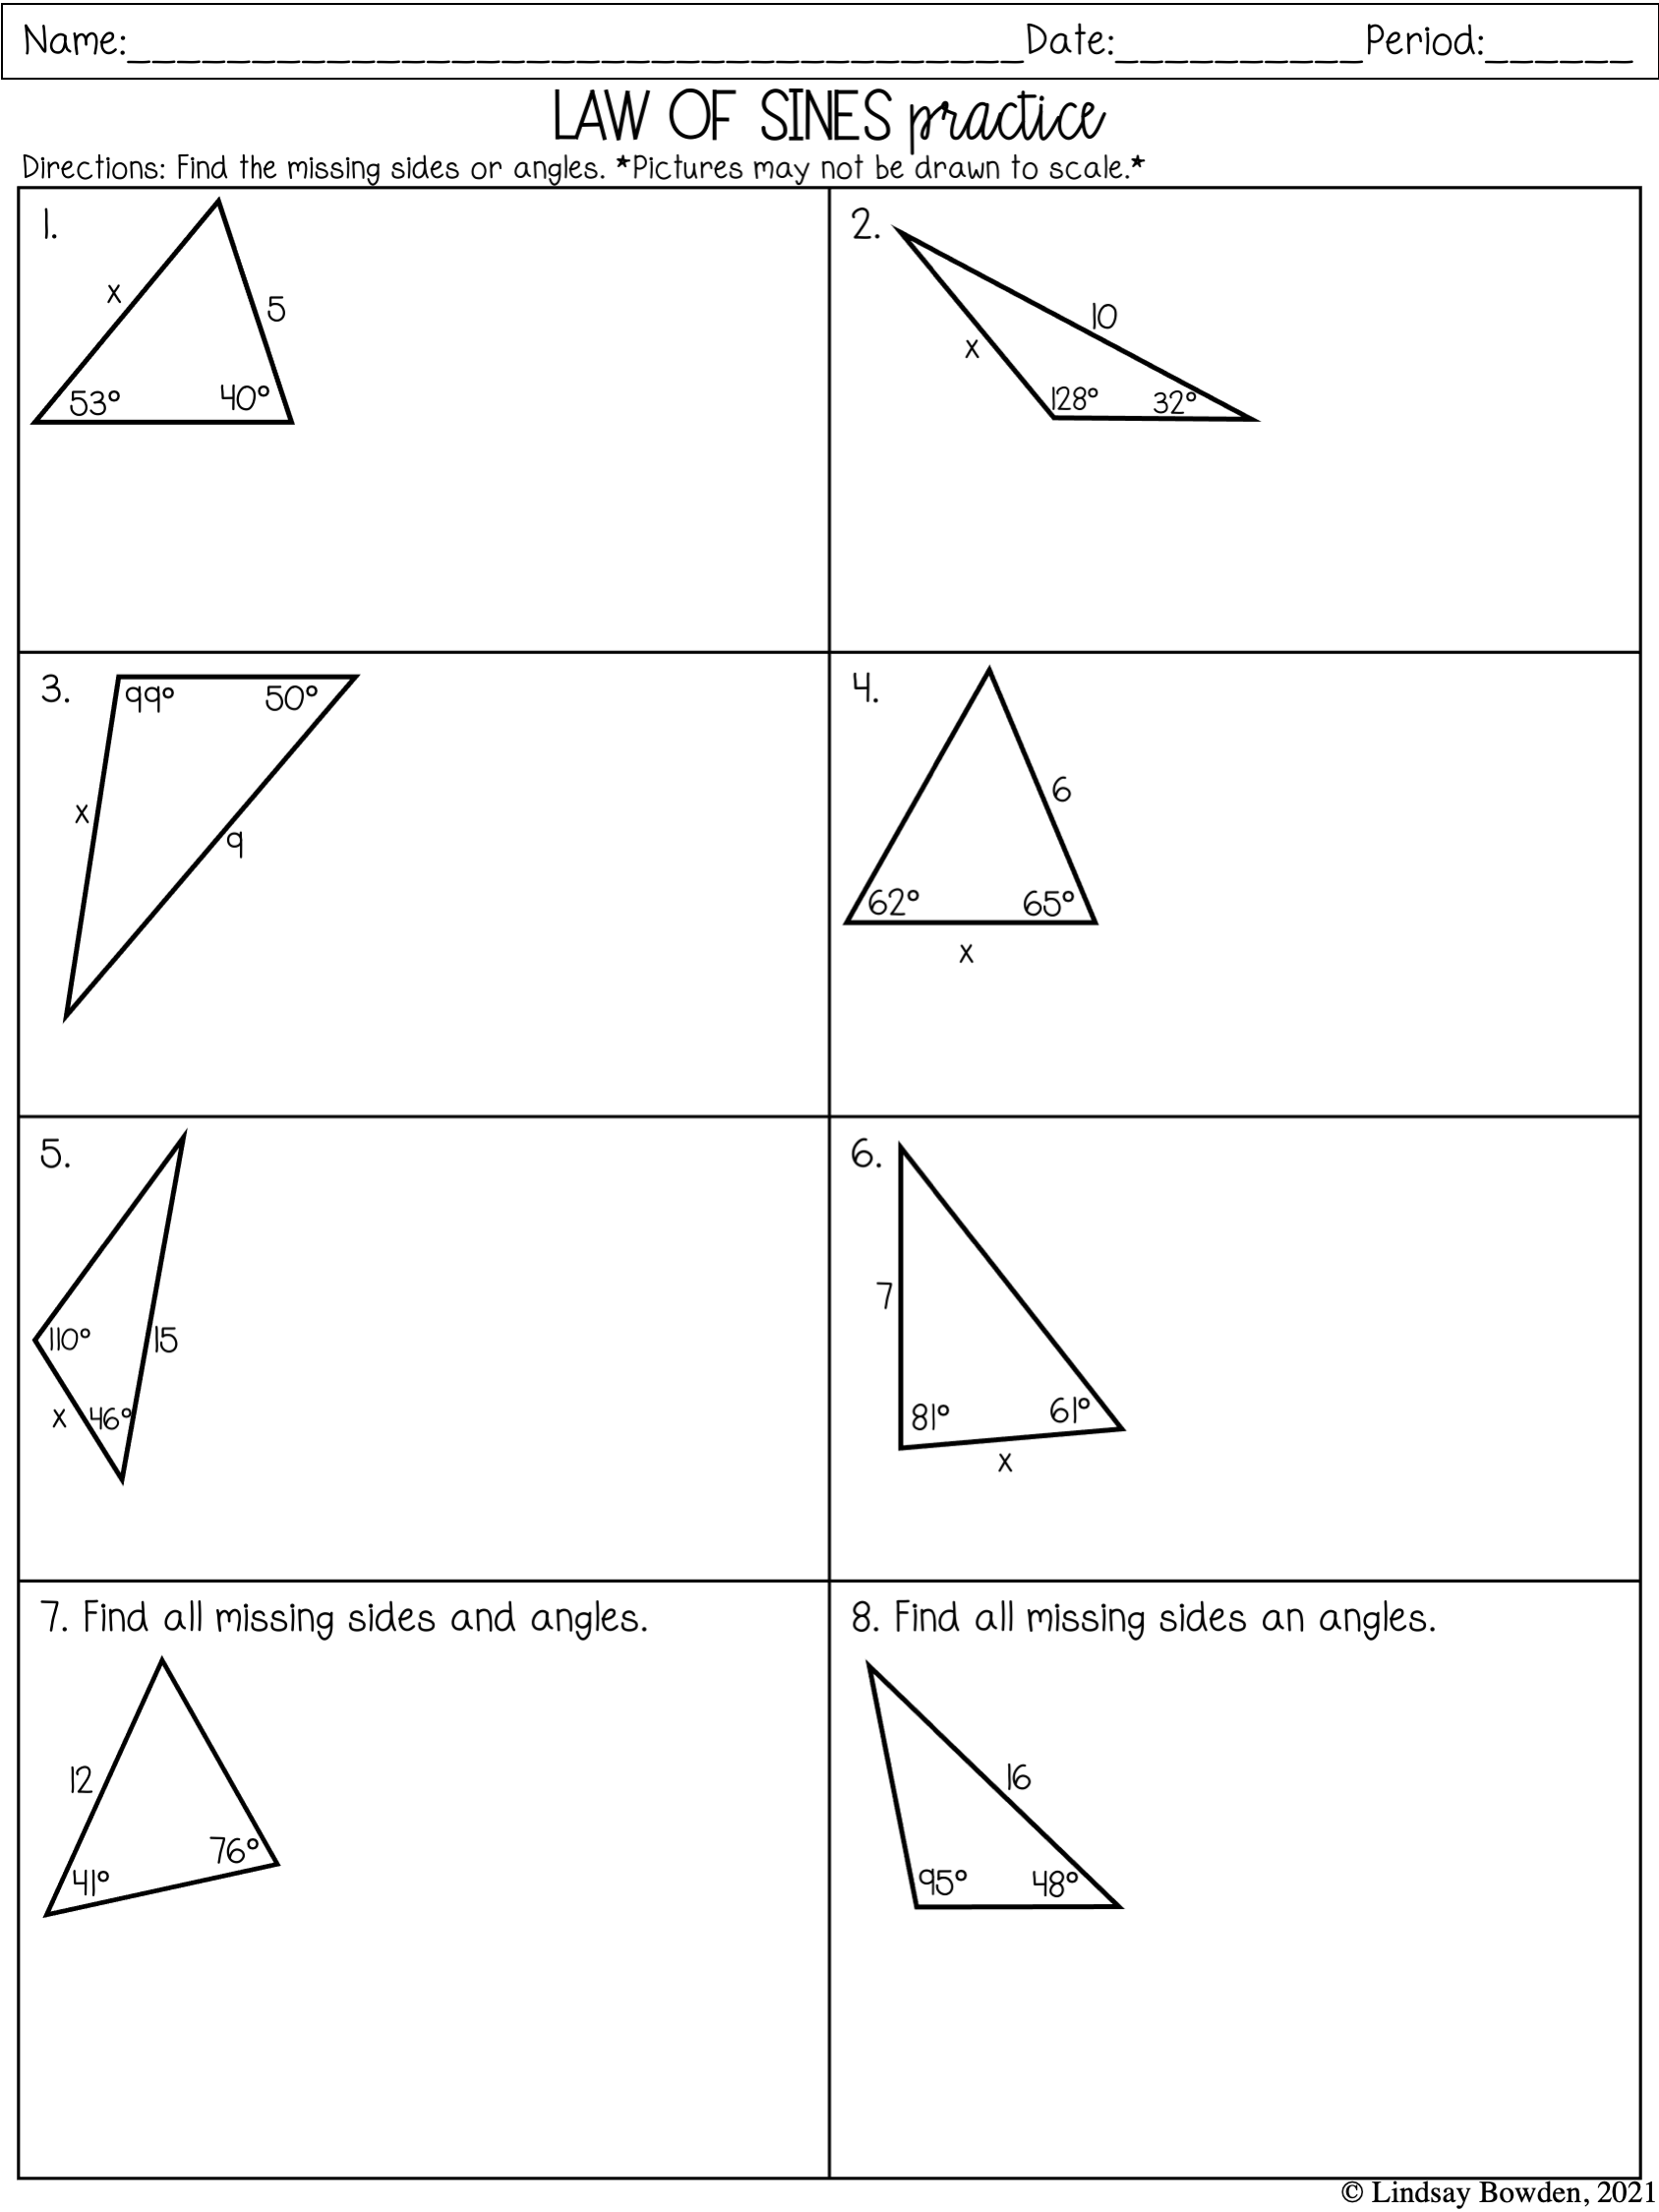 Law of Sines and Cosines Notes and Worksheets - Lindsay Bowden Intended For Law Of Sines Worksheet Answers